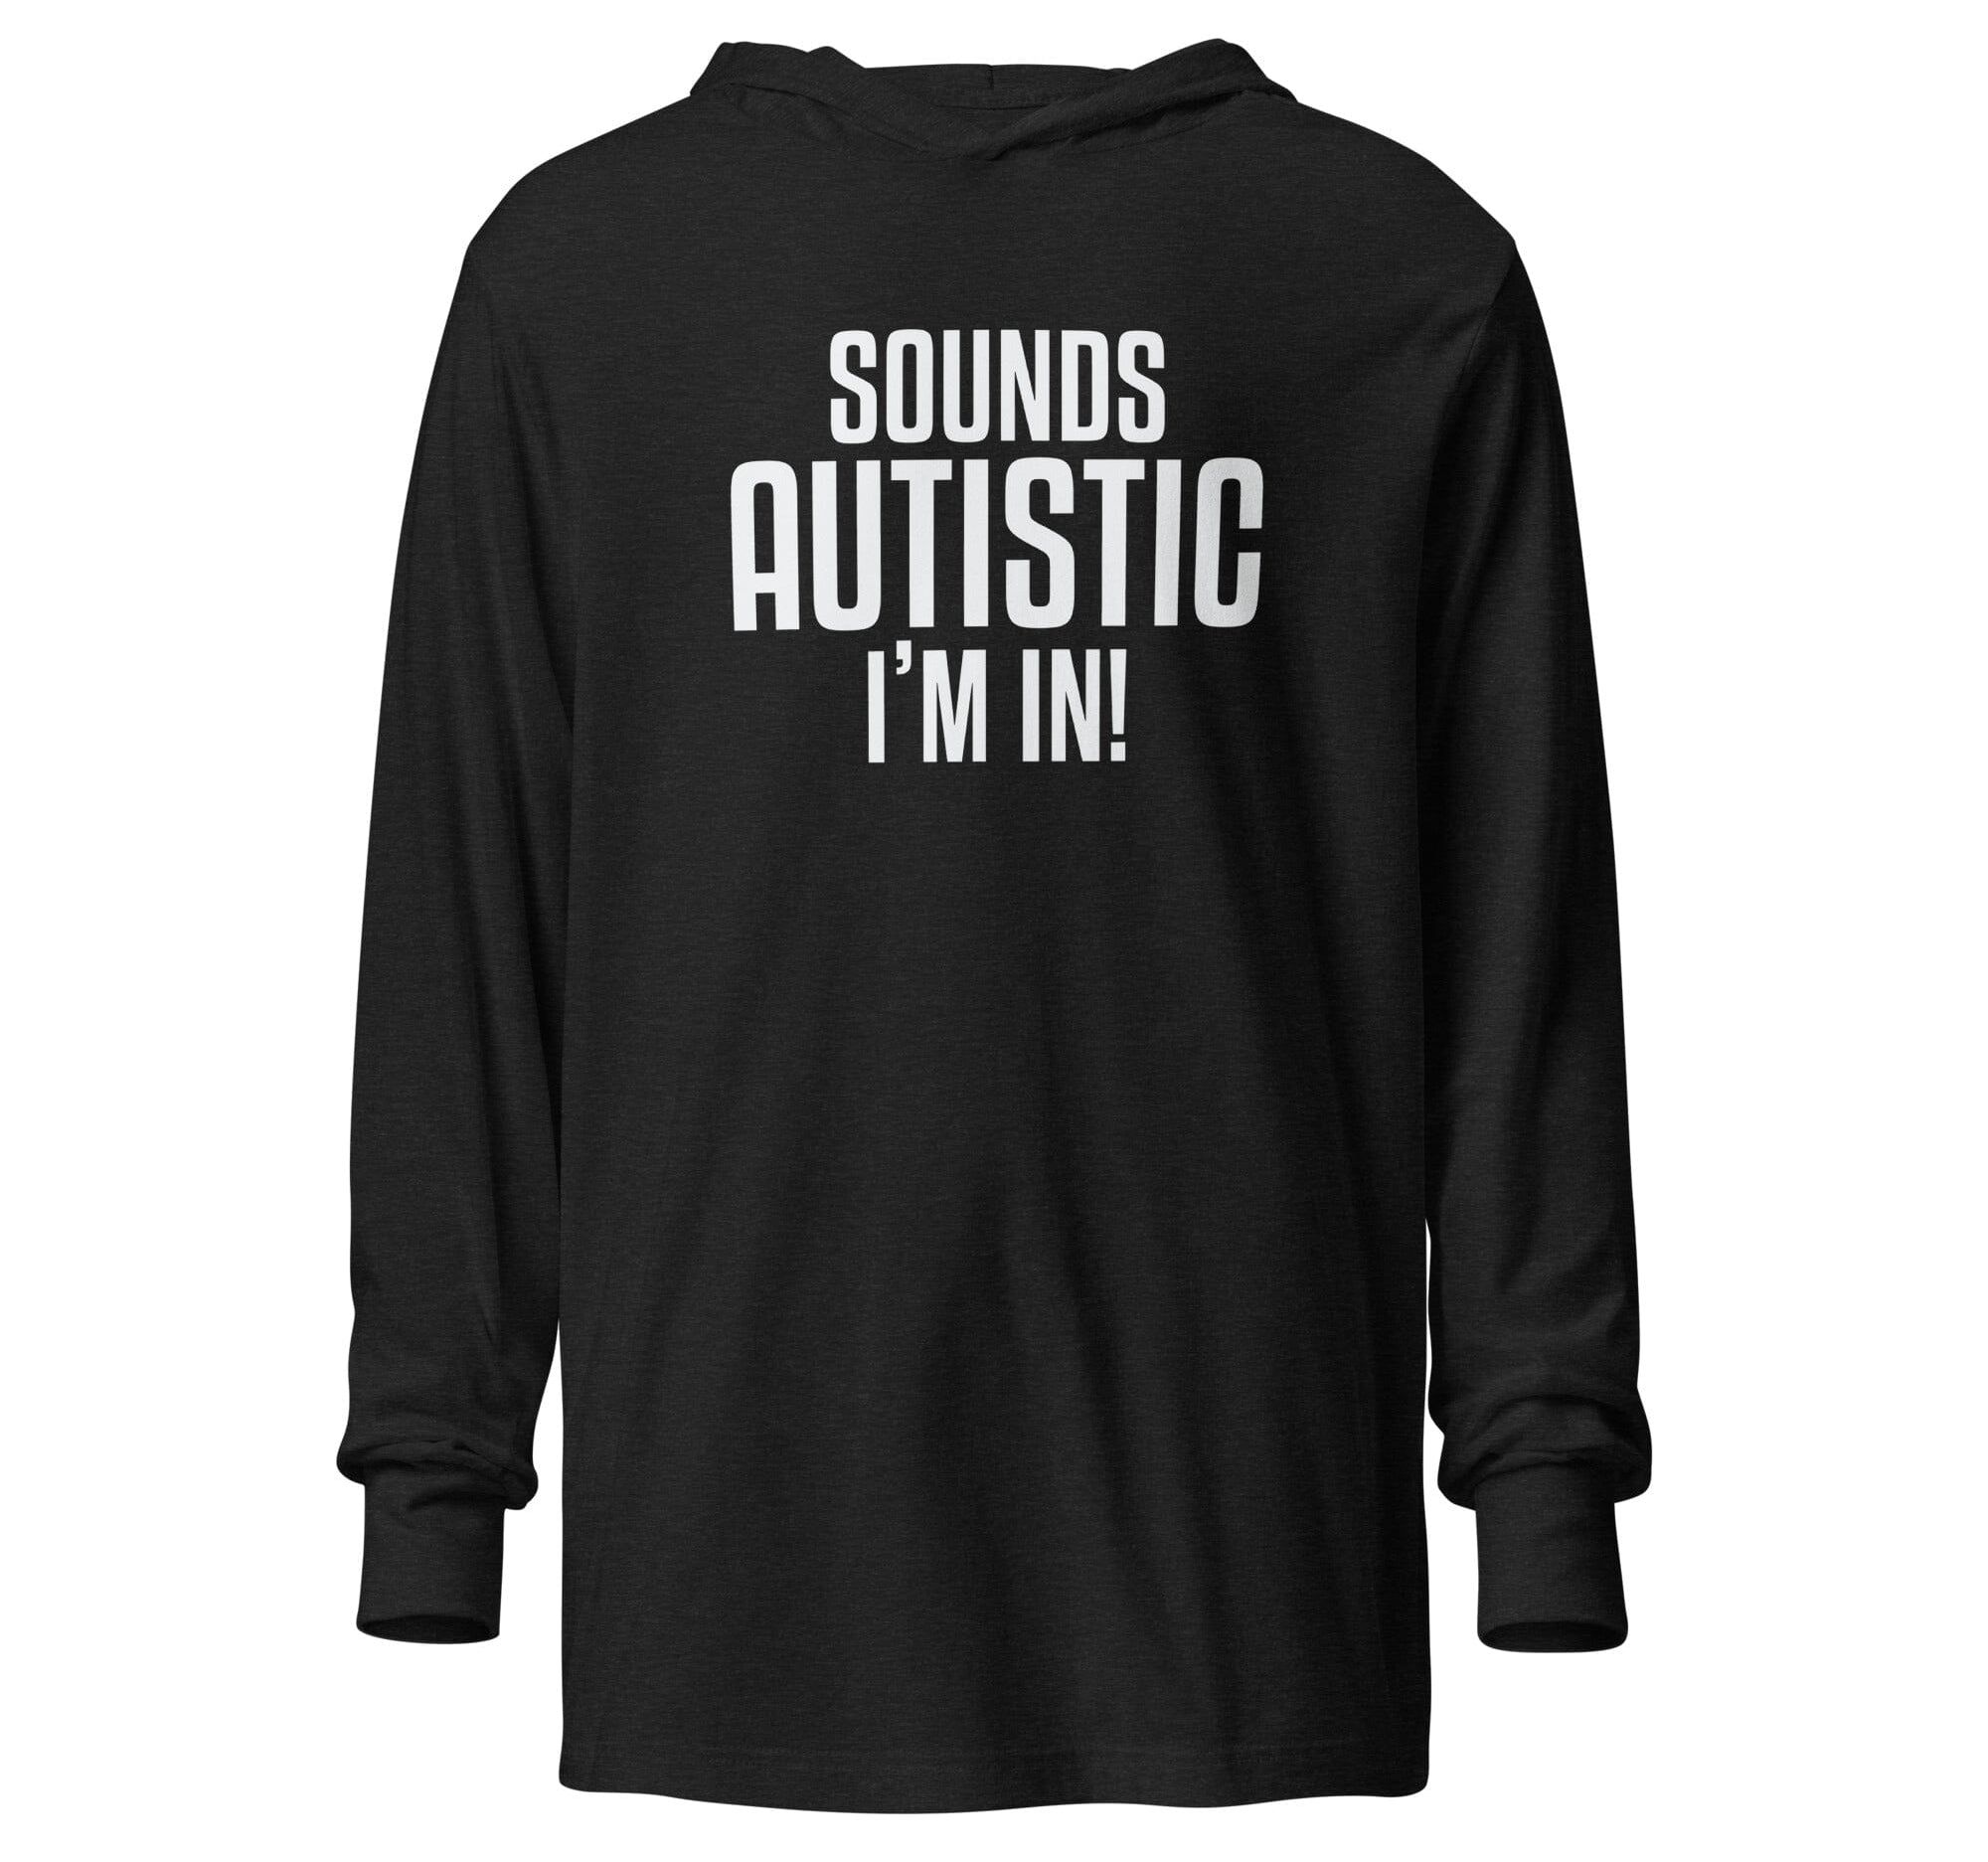 Sounds Autistic I'm In Unisex Hooded long-sleeve tee The Autistic Innovator Charcoal-Black Triblend XS 